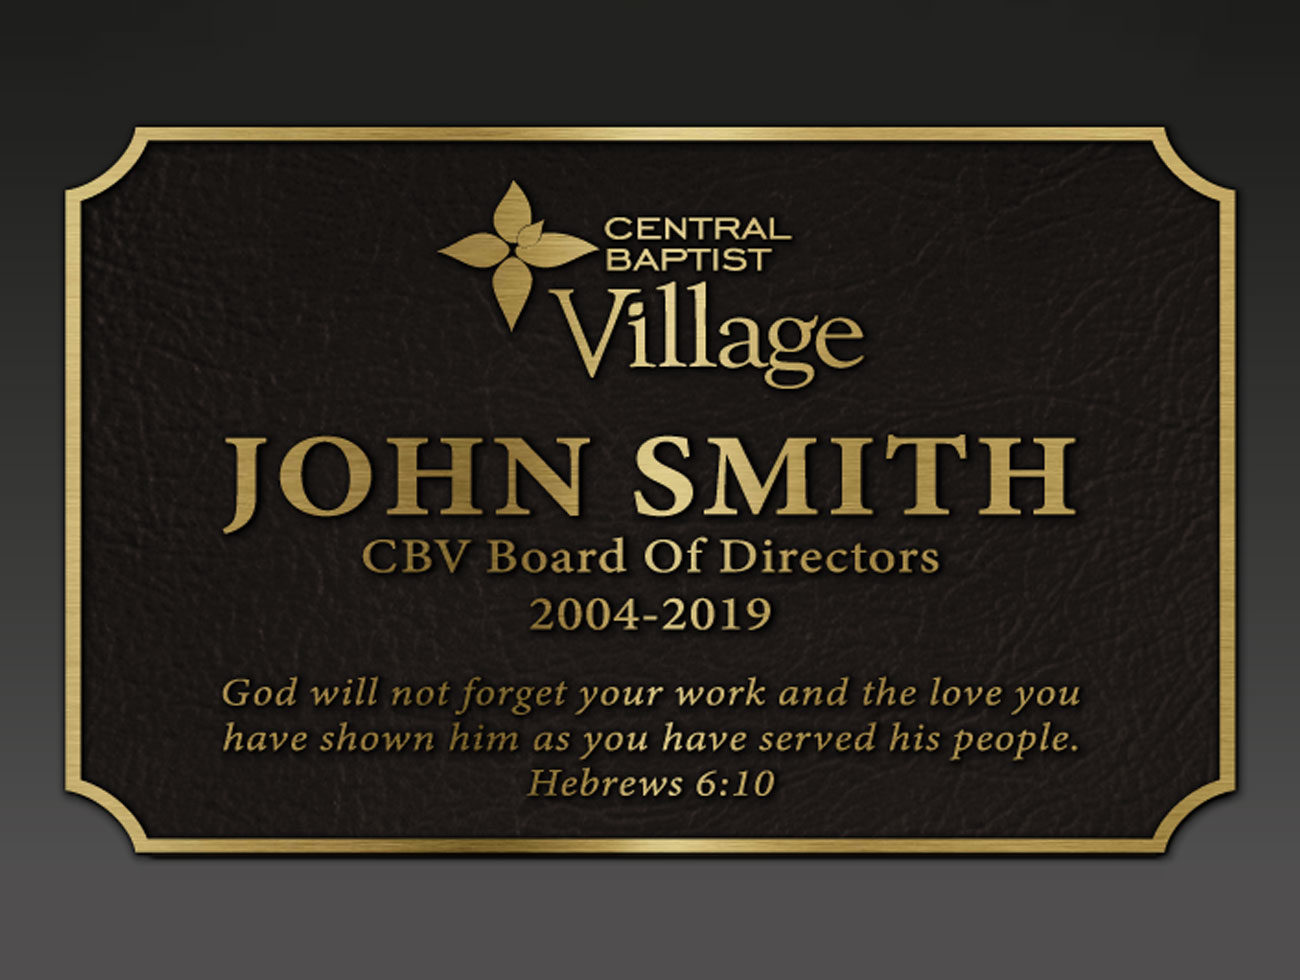 John Smith plaque with inscription: CBV Board of Directors 2004-2019. God will not forget your work and the love you have shown him as you have served his people. Hebrews 6:10